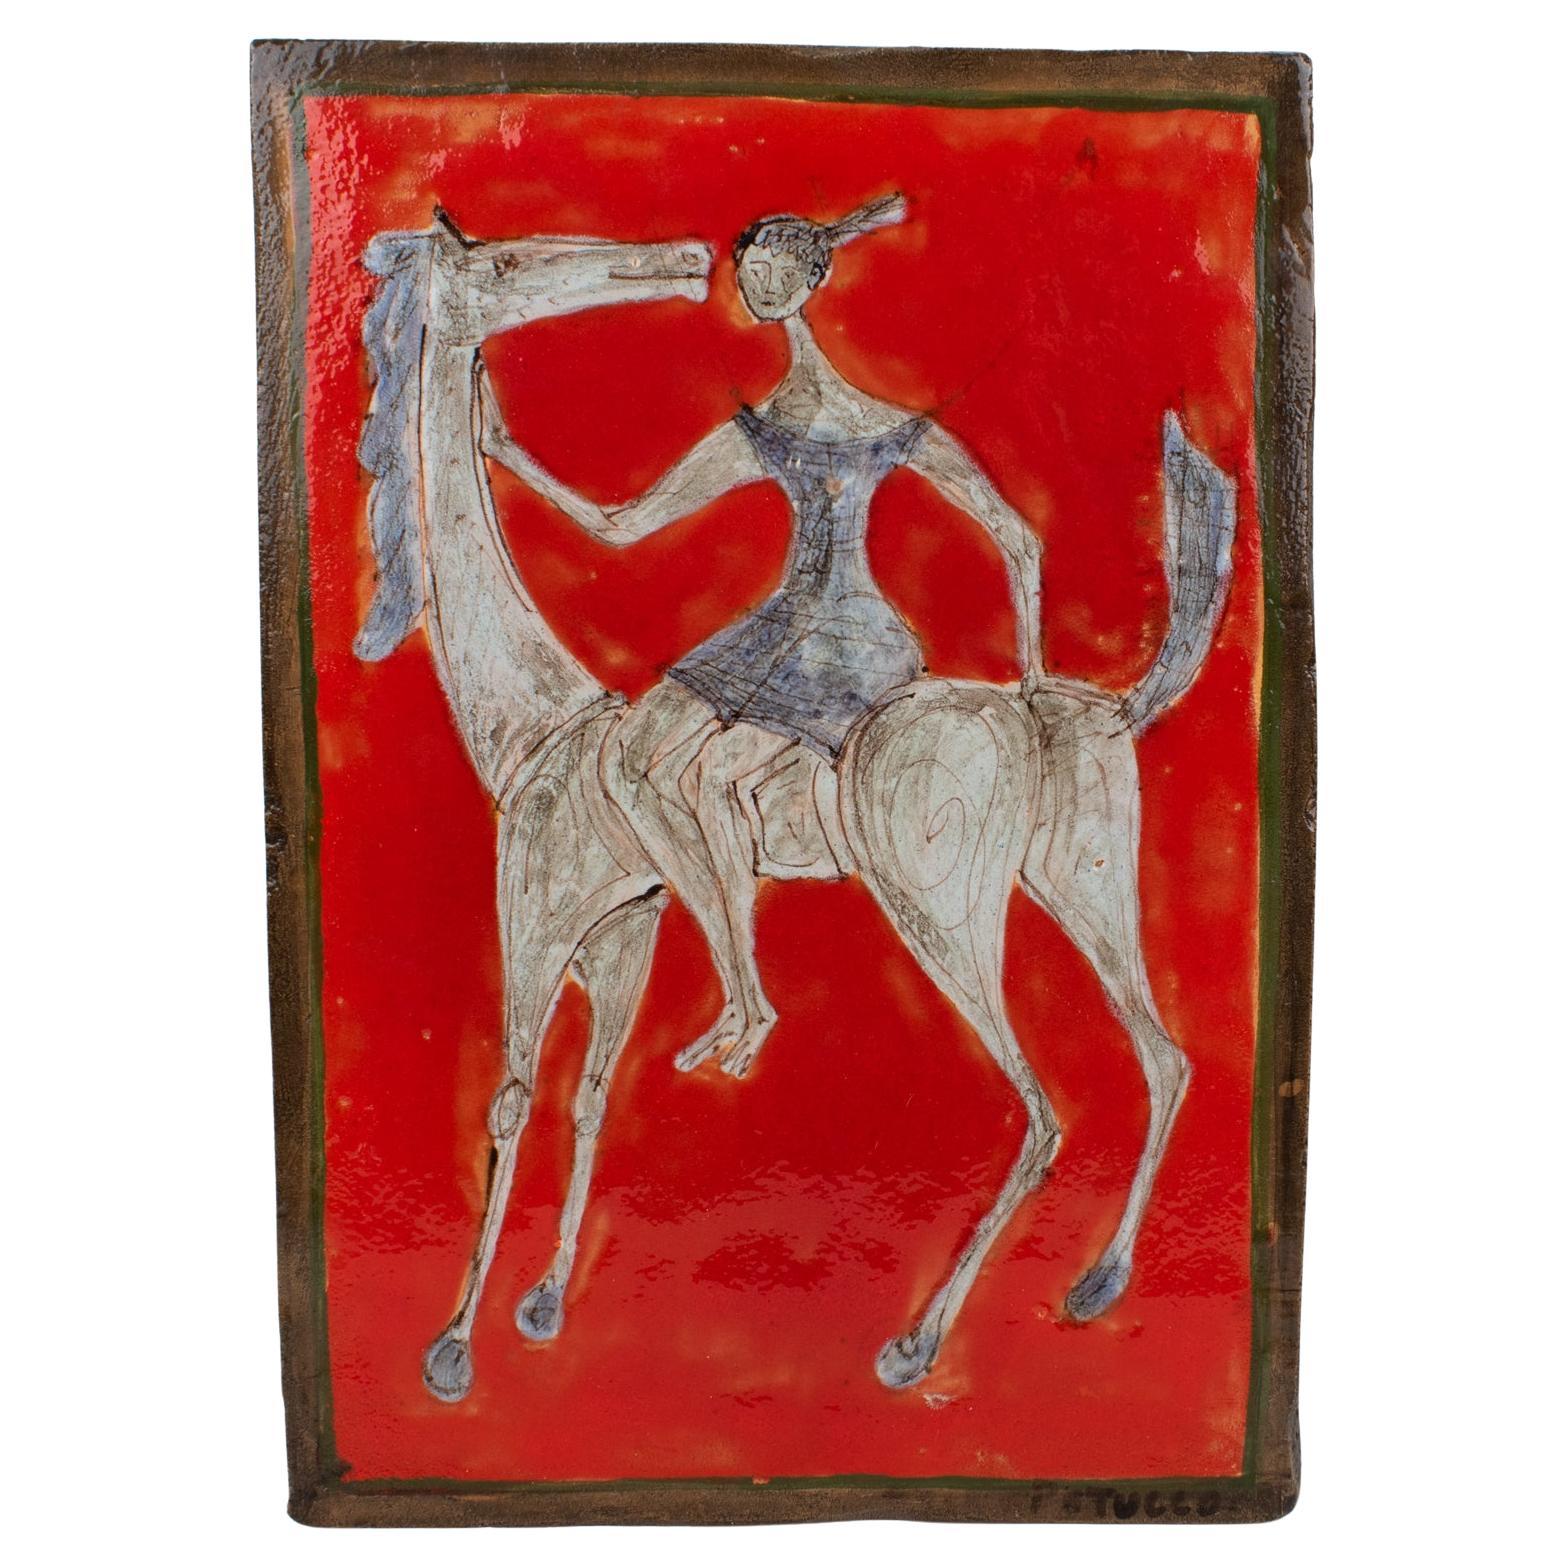 Giovanni Petucco Italy Ceramic Wall Tile of Woman on a Horse, 1950s For Sale